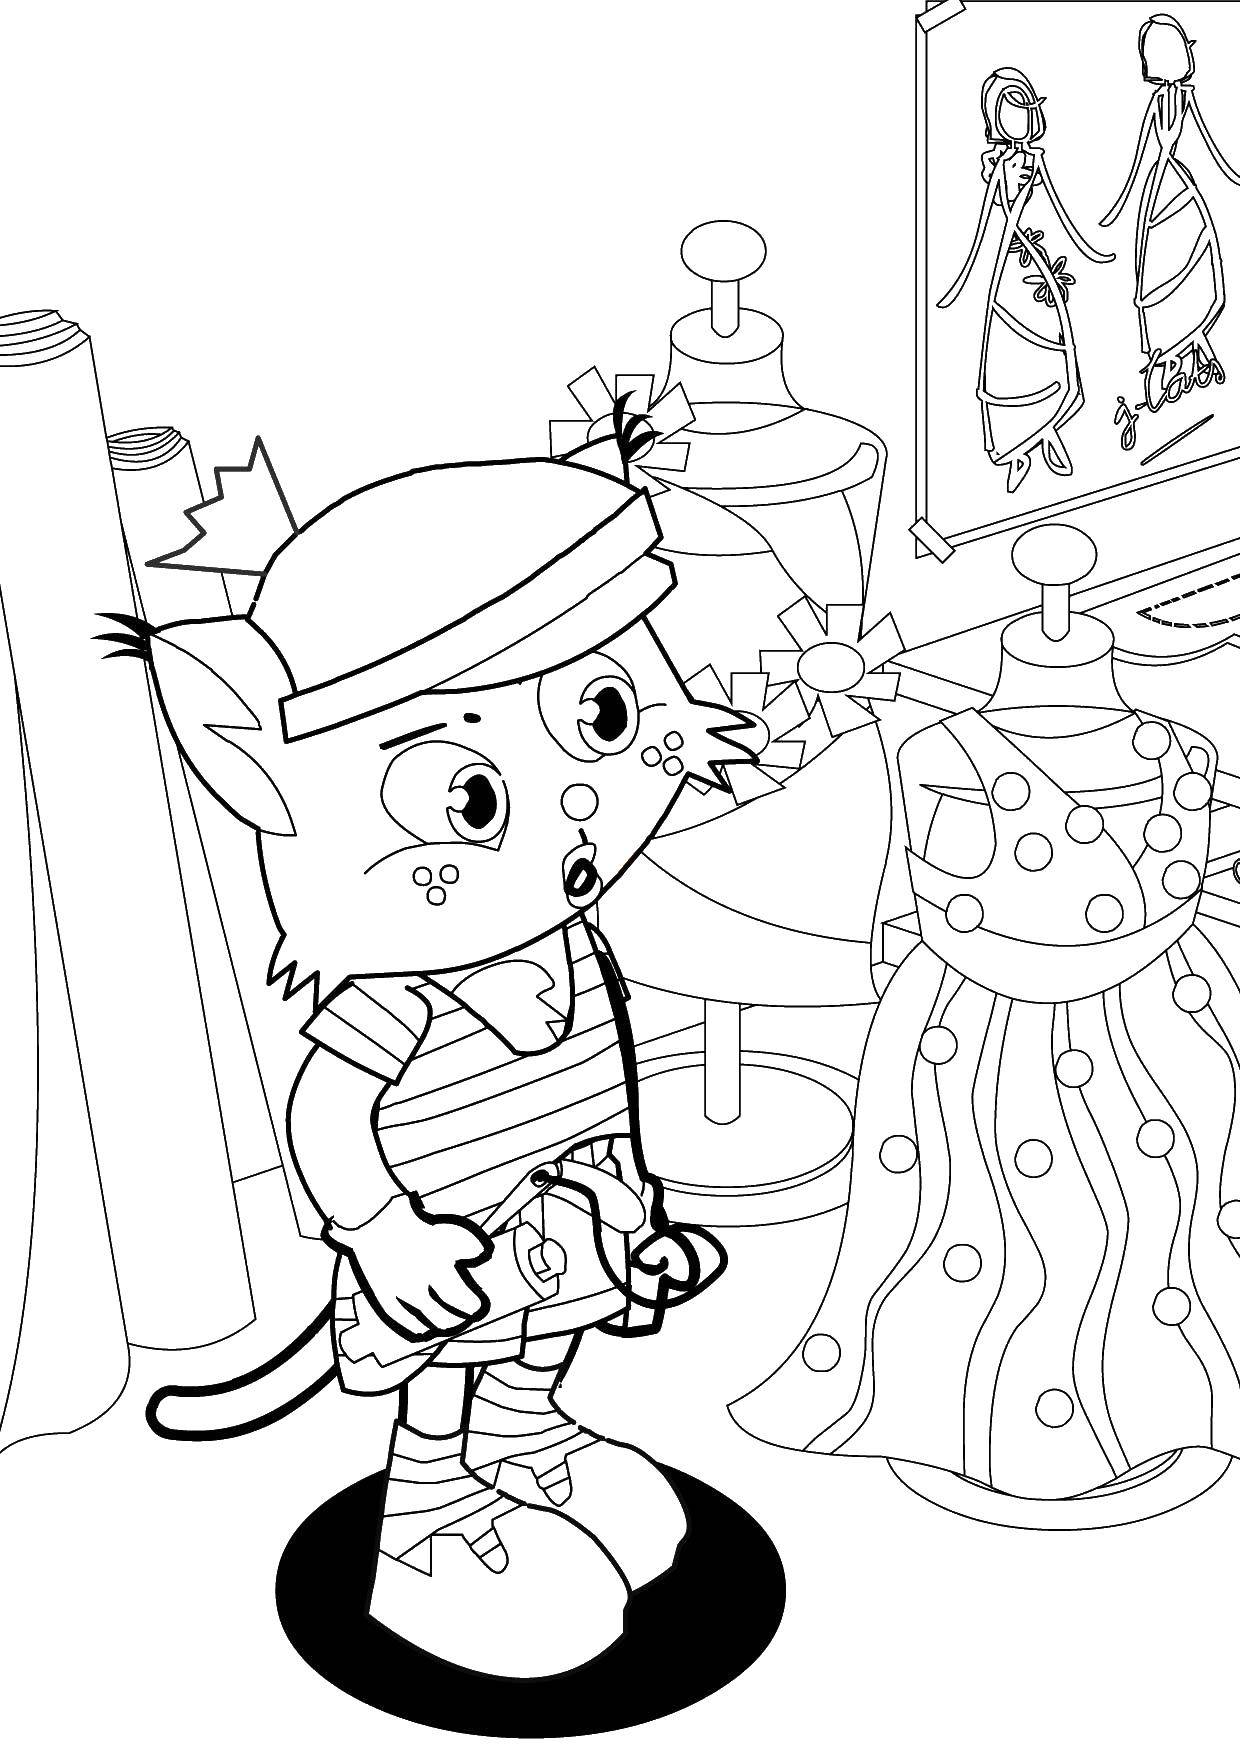 Coloring Kitty and dresses. Category Dress. Tags:  dresses, cat clothing.